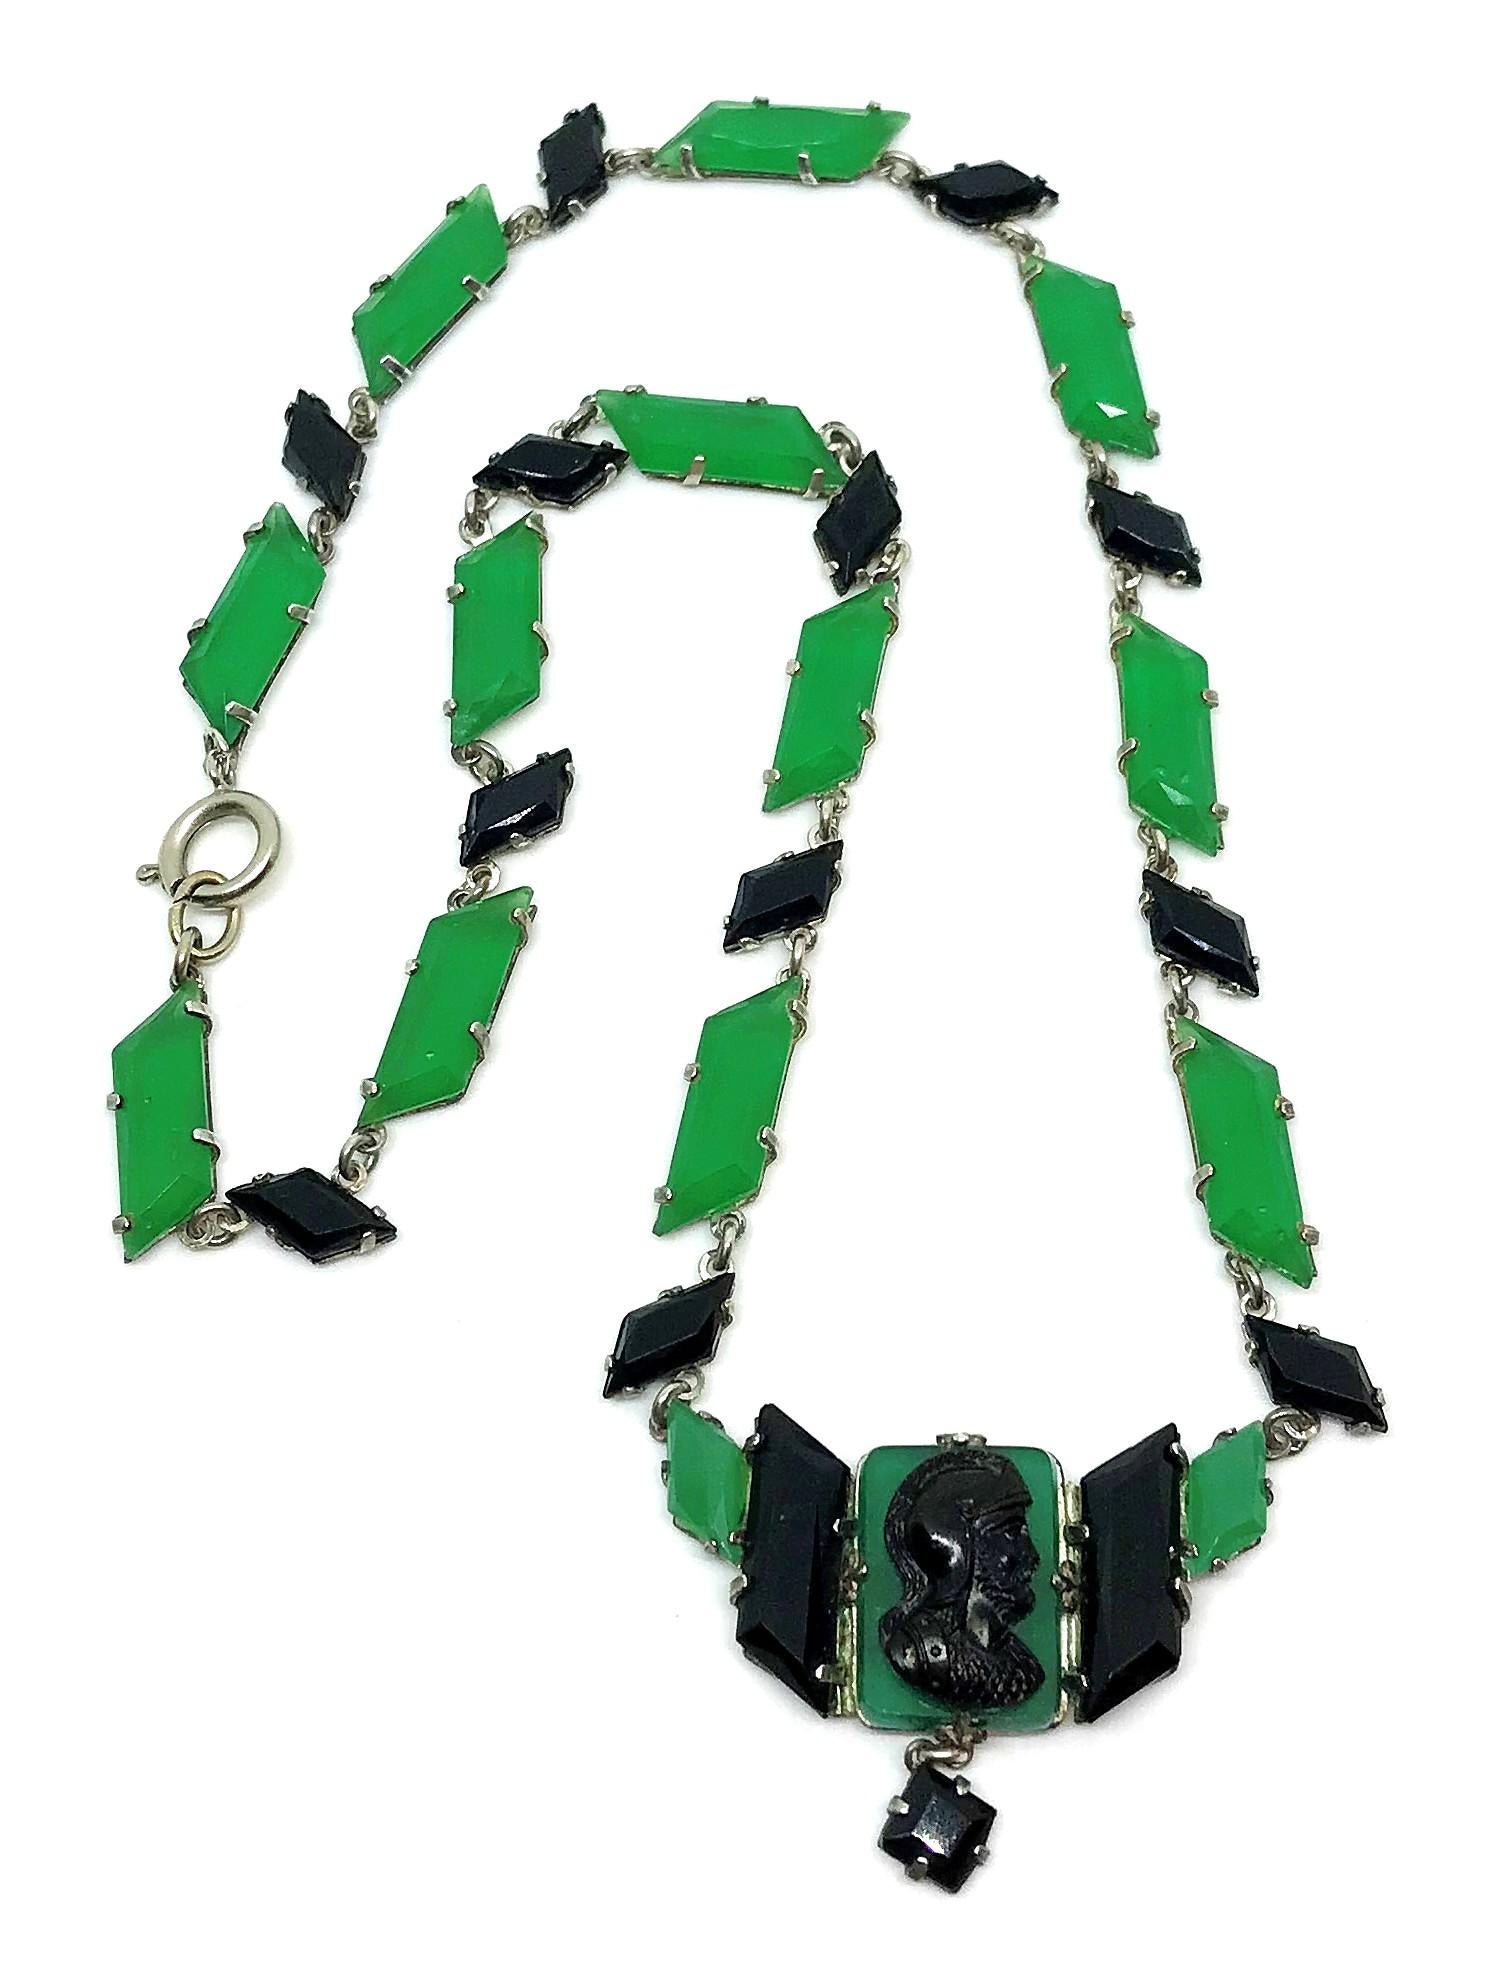 Circa 1920's silver tone metal link necklace prong set with green and black faceted glass stones with a center pendant embellished with a molded black glass Roman Soldier cameo and a small prong set square black glass drop.  It is in extremely good